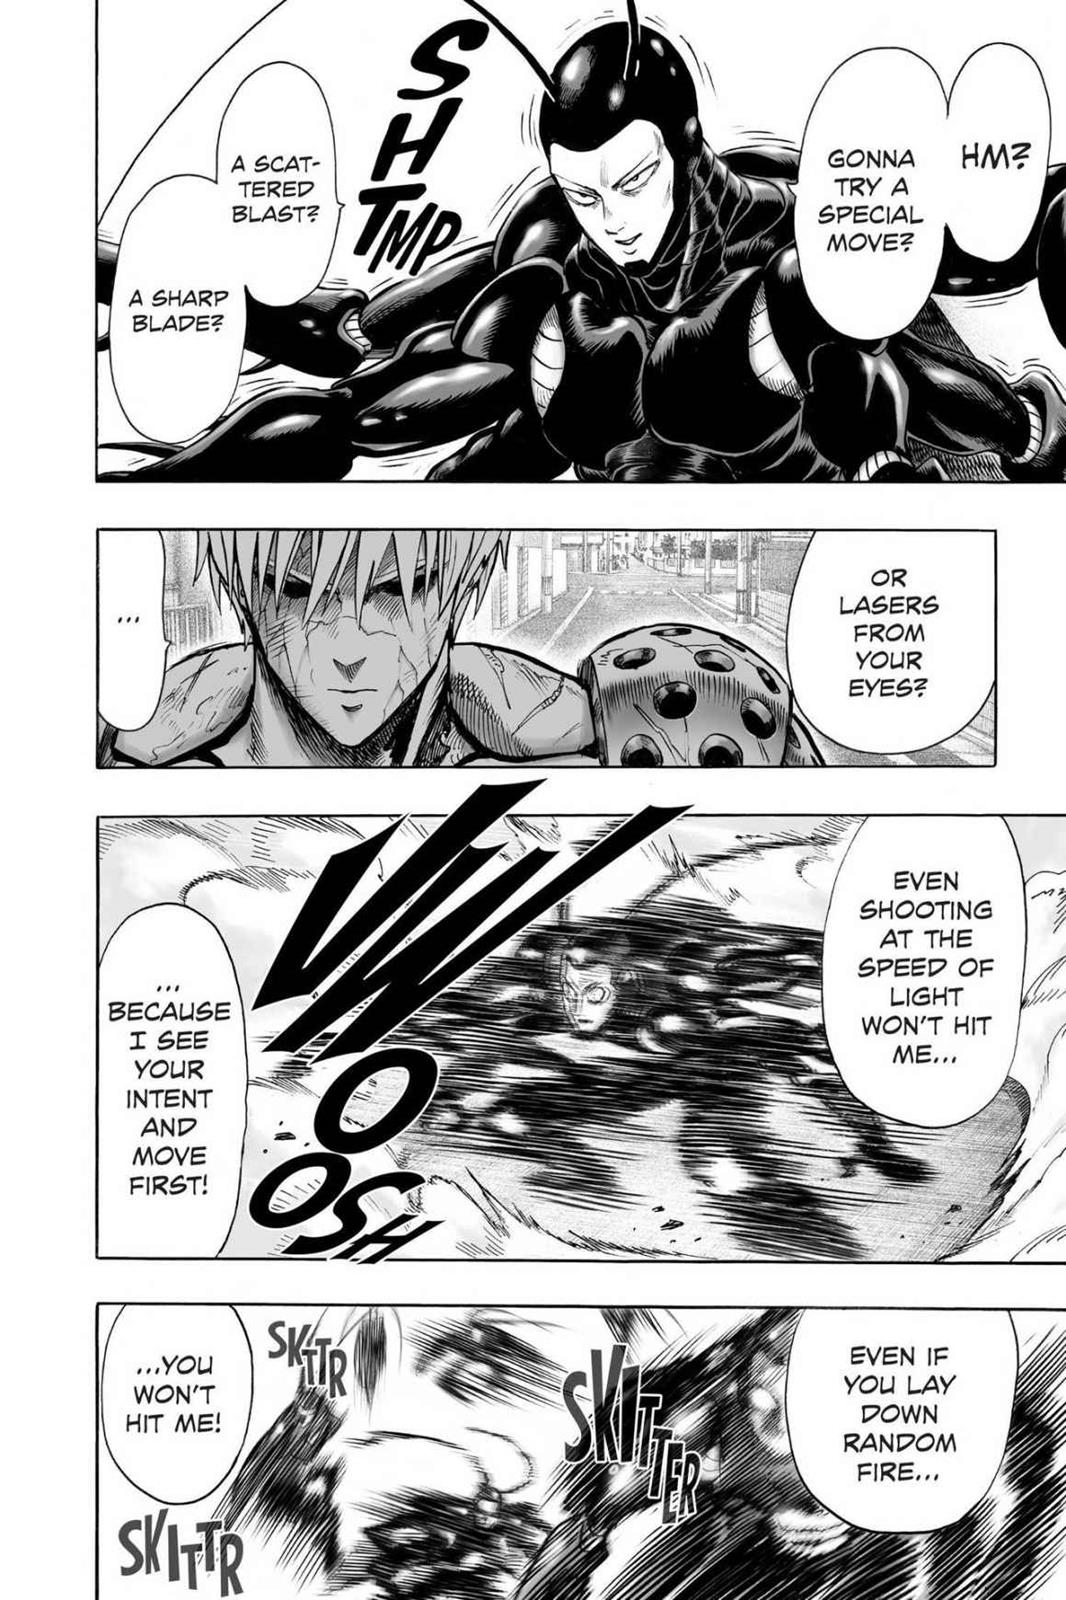 One-Punch Man, Punch 64 image 19